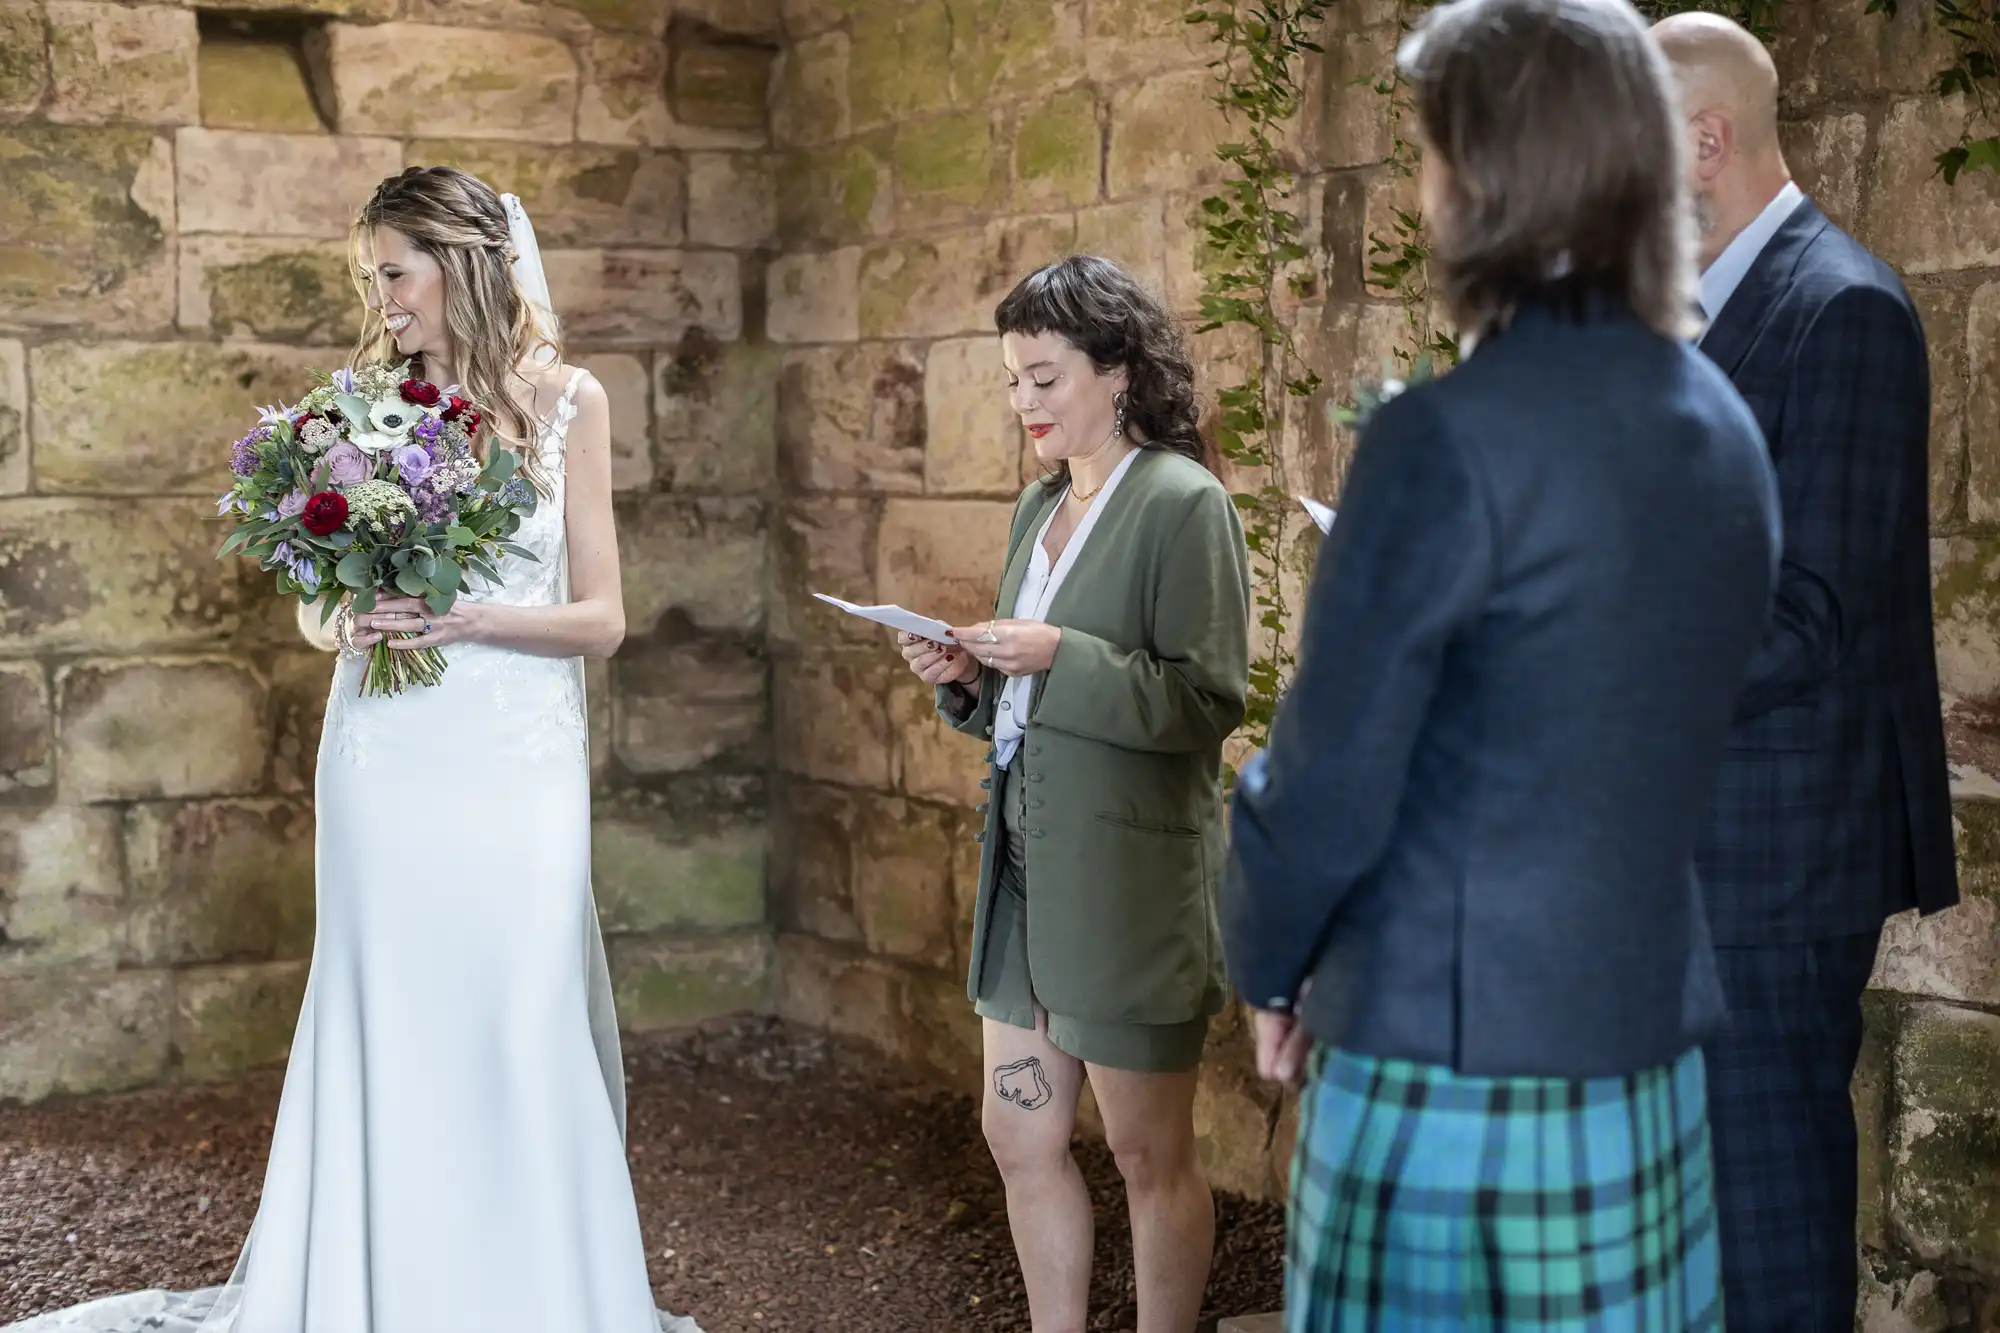 A woman in a wedding dress stands with a bouquet of flowers. Another woman reads from a paper while two people are in the foreground. The setting appears to be rustic with stone walls.